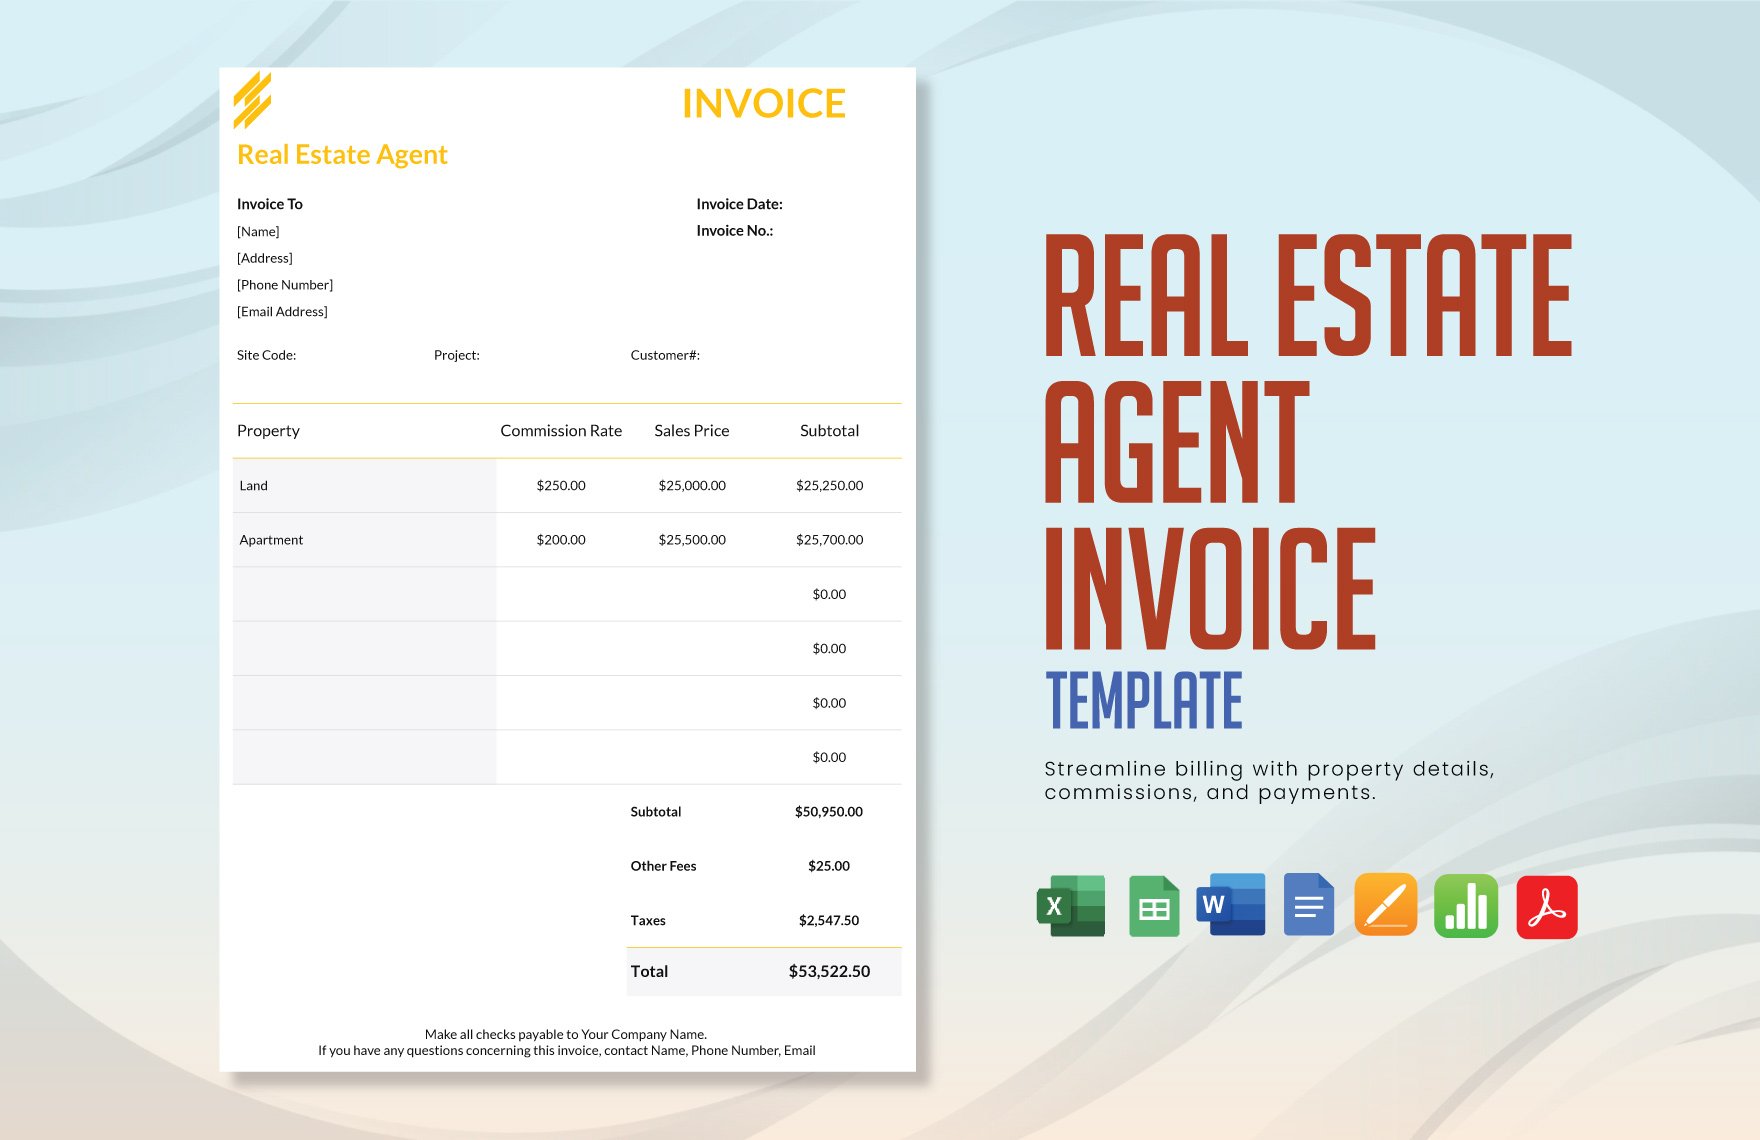 Real Estate Agent Invoice Template in Word, Google Docs, Excel, PDF, Google Sheets, Apple Pages, Apple Numbers